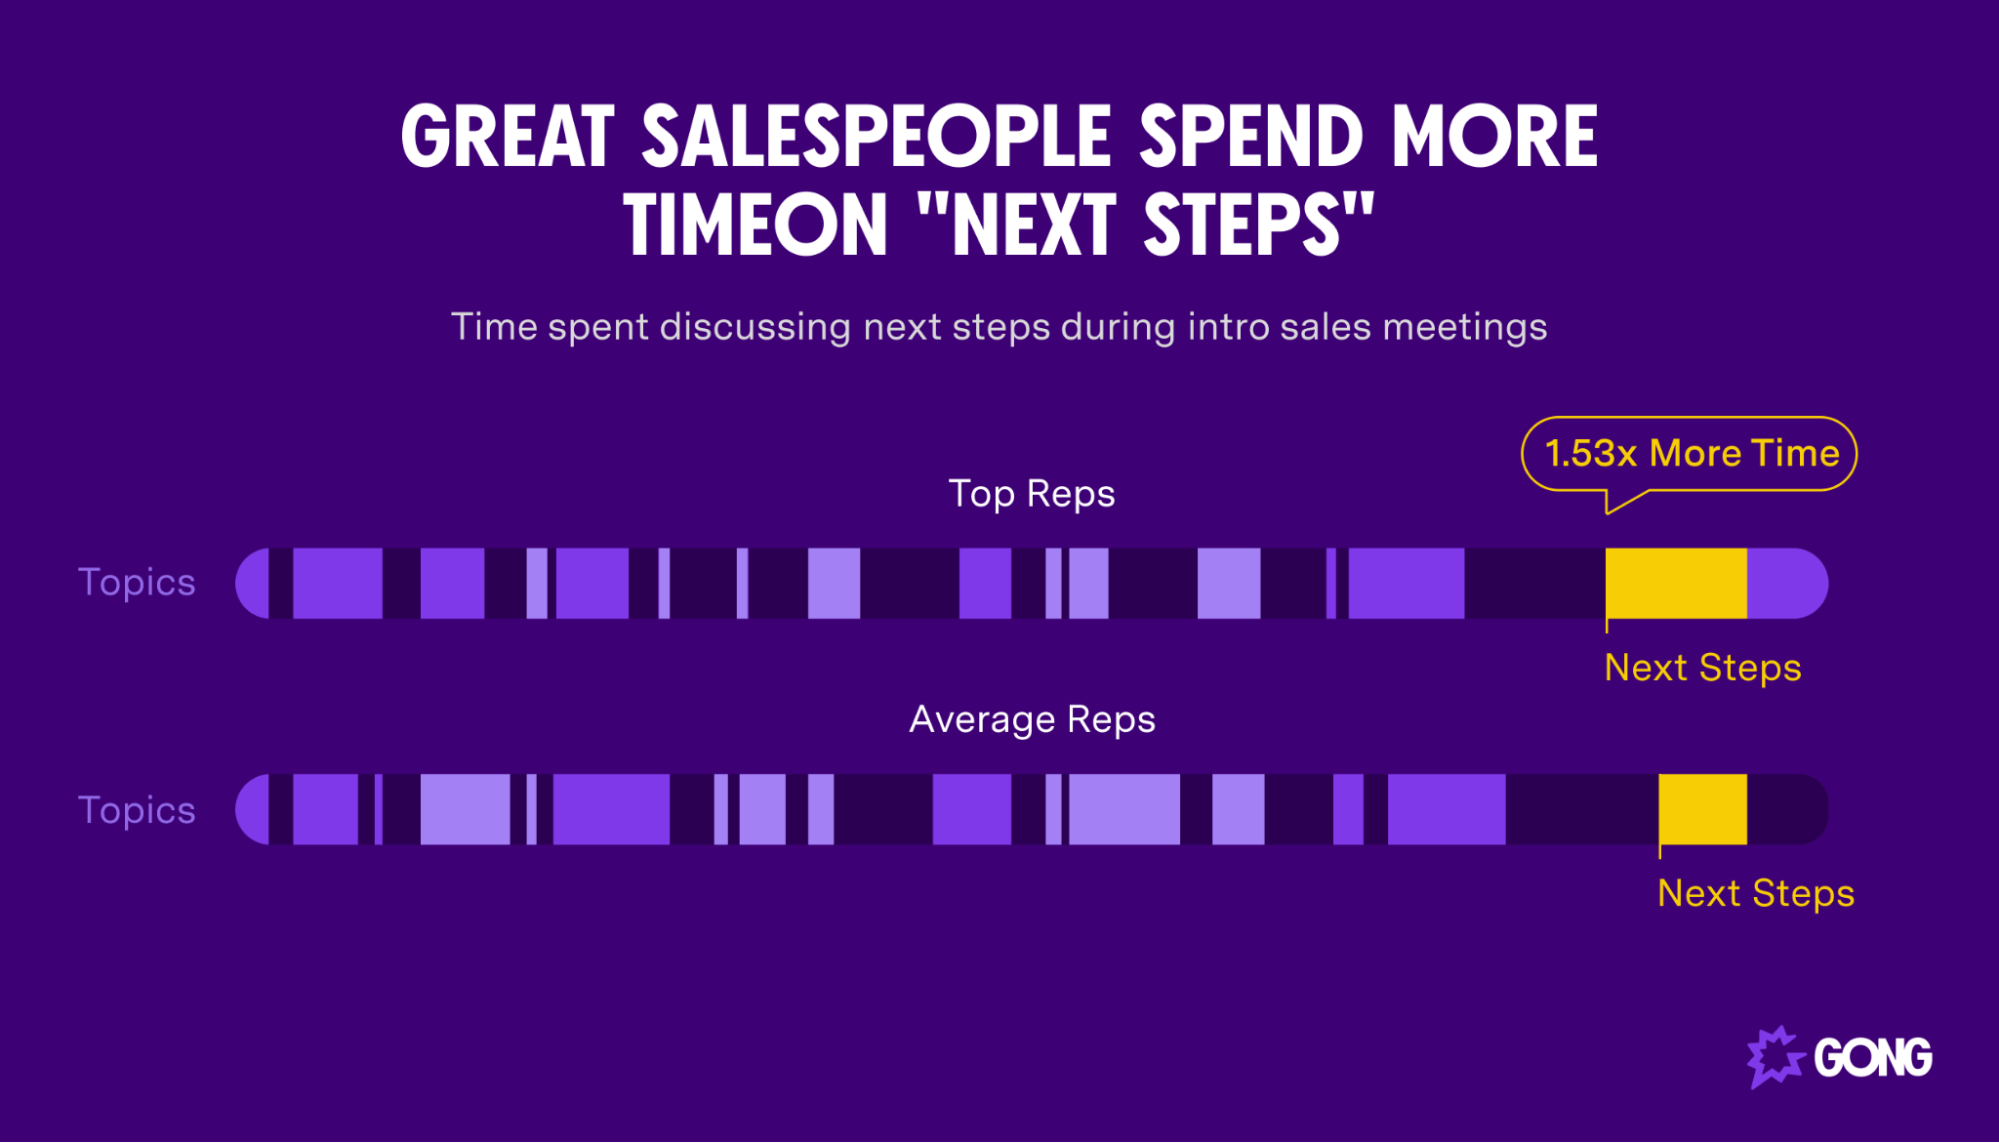 Great salespeople spend more time on next steps